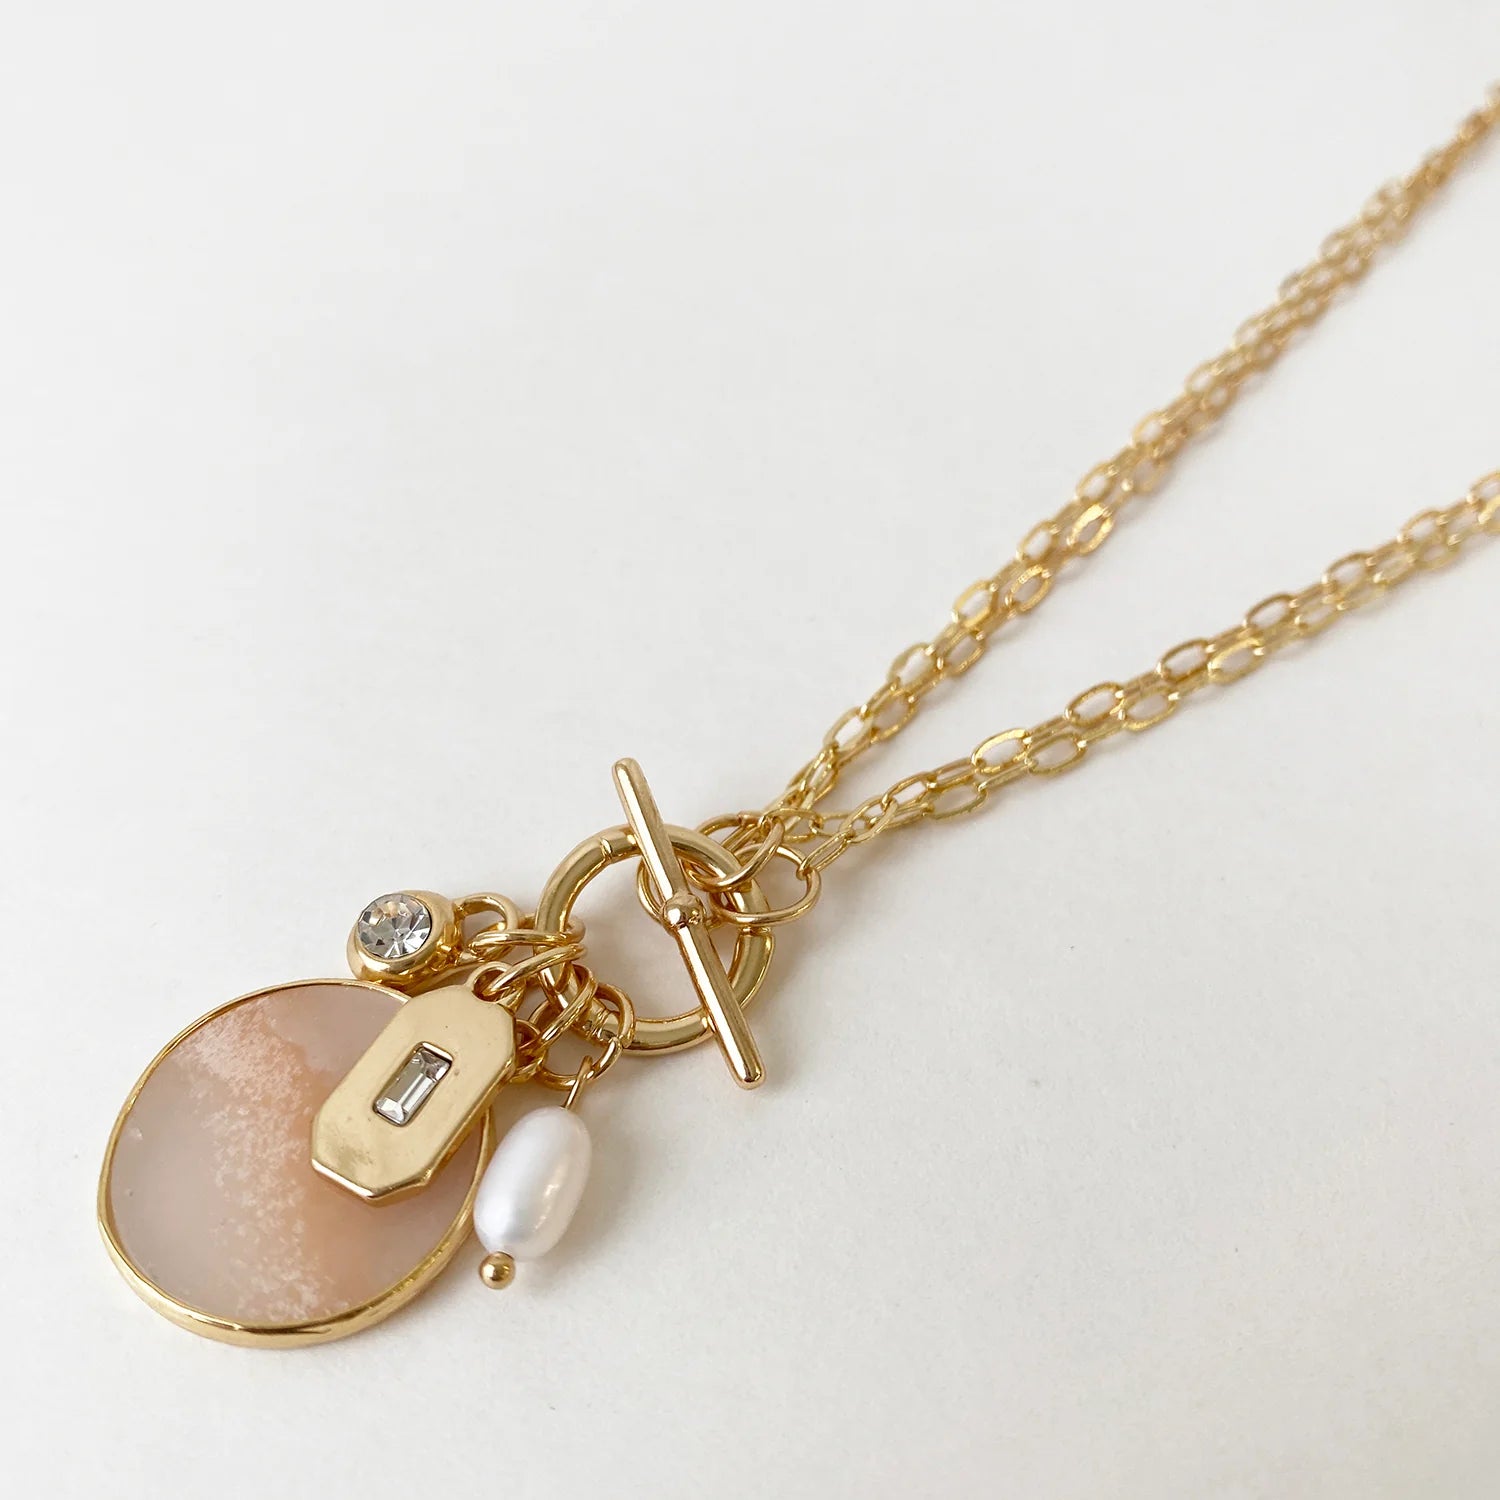 Peach & Gold w/ Stone & Beads Chain Necklace | Caracol